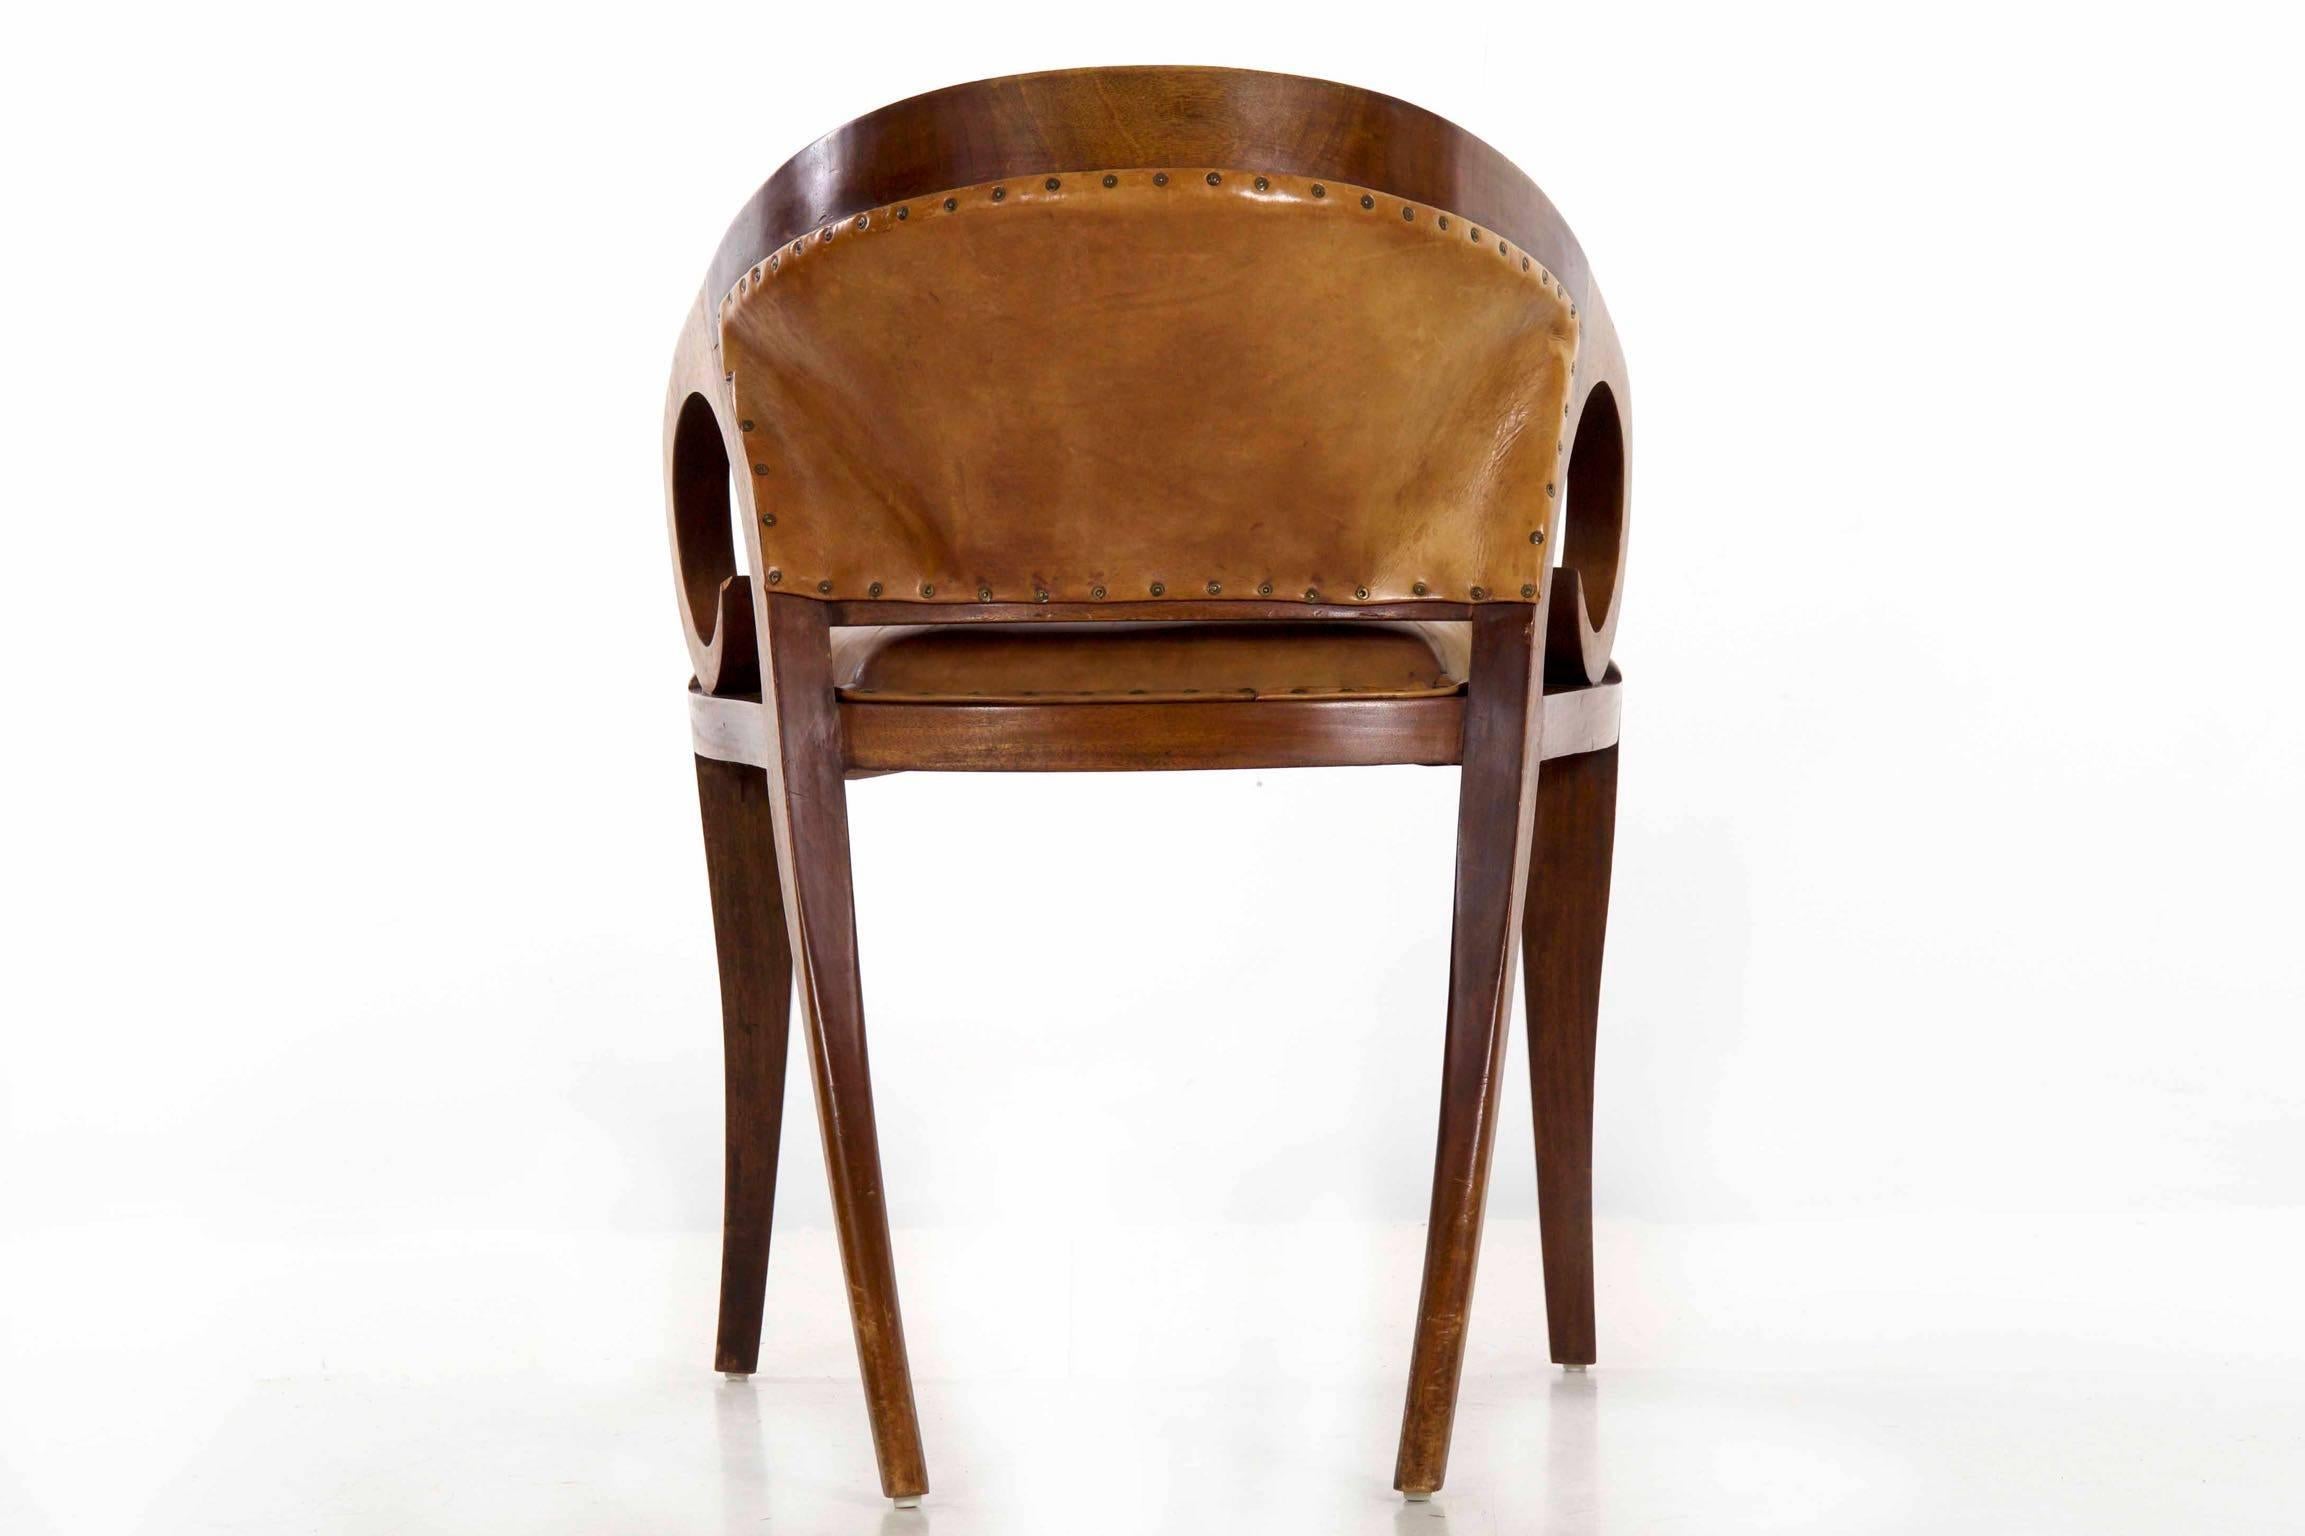 Early 20th Century Vienna Secessionist Scrolled Mahogany and Leather Armchair, circa 1910